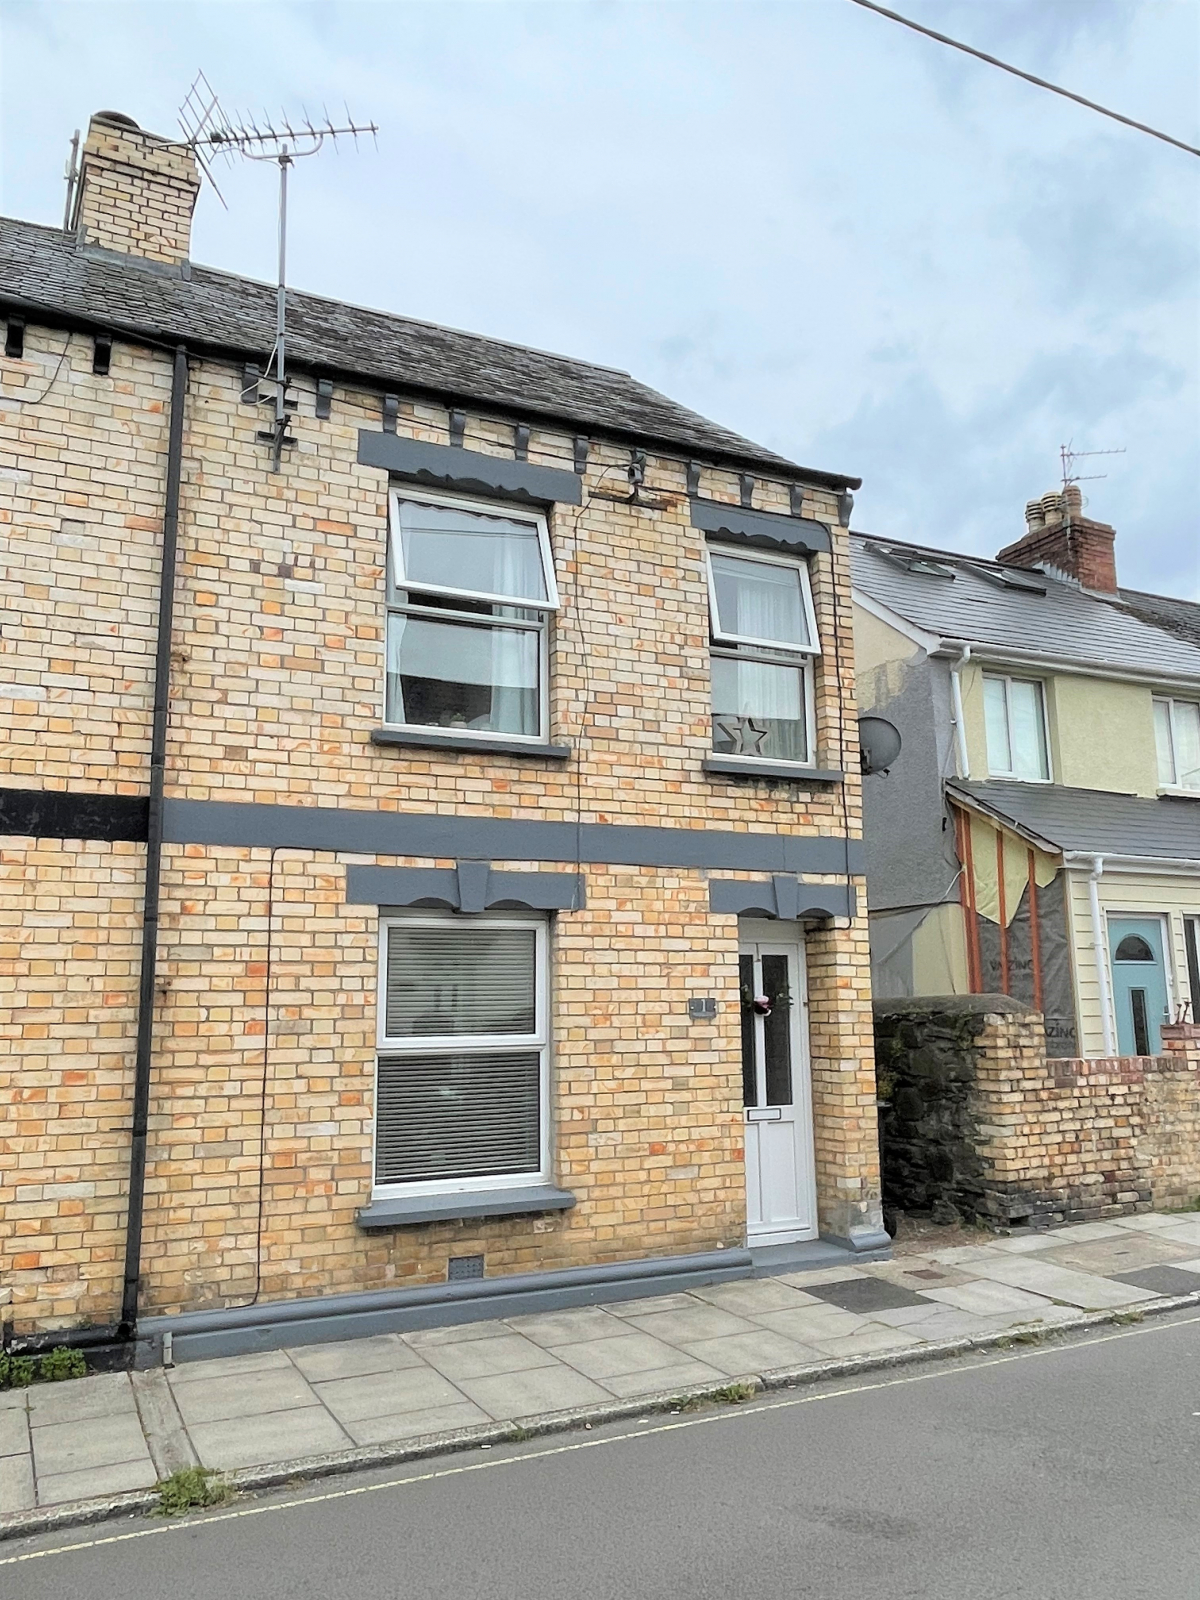 3 bed end of terrace house for sale, Devon, EX32